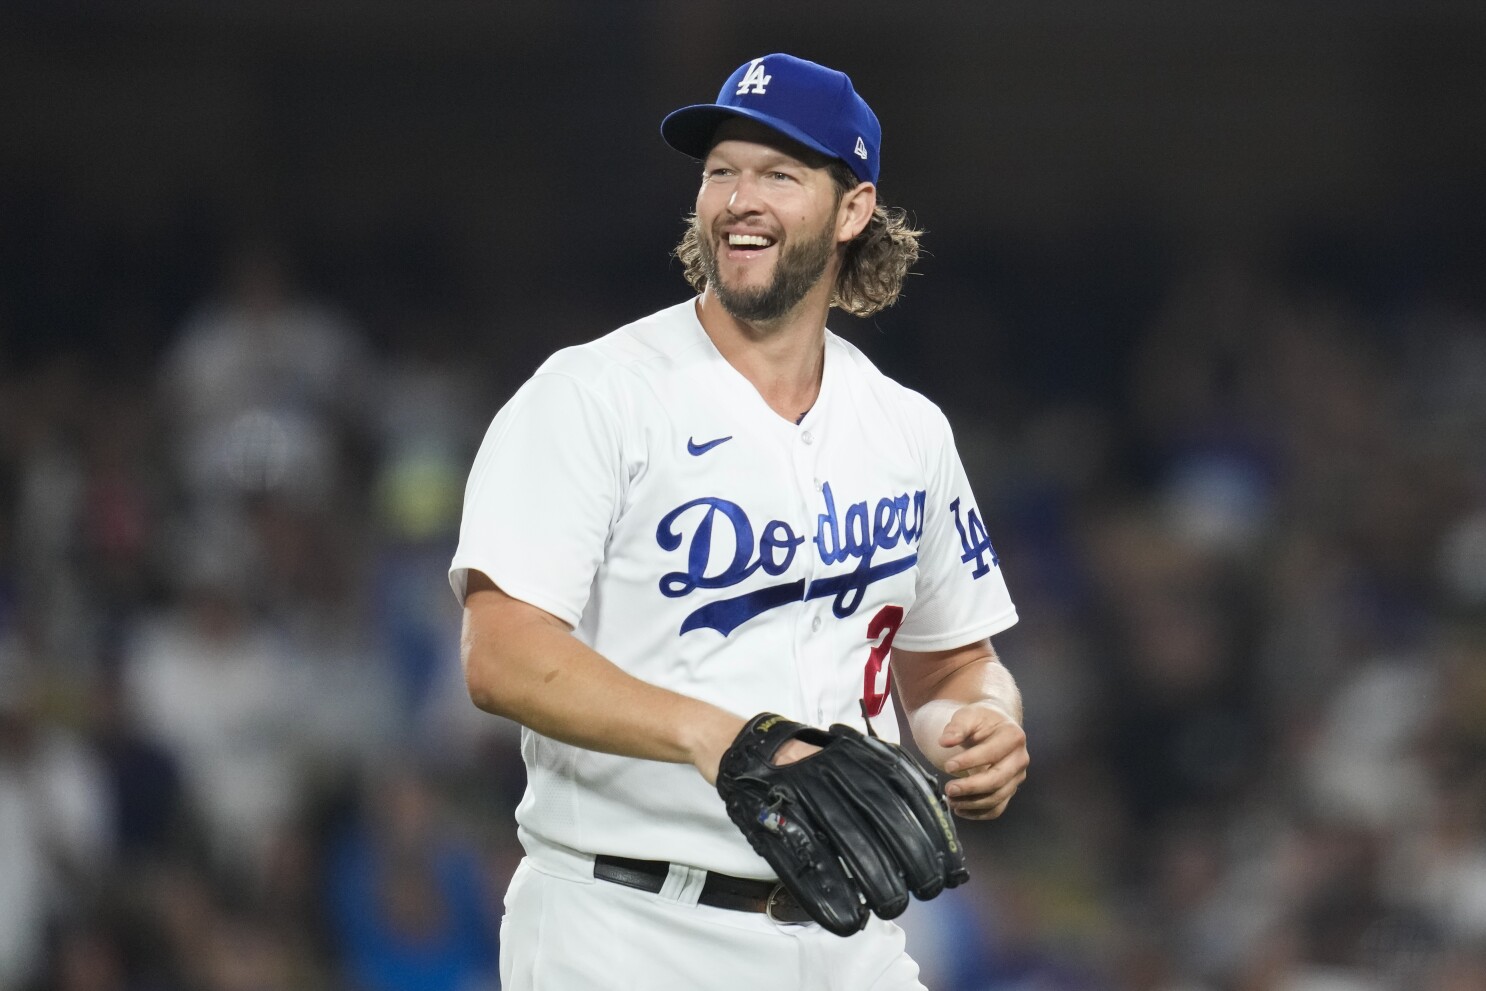 Kershaw deals, and the Dodgers get 2 big breaks in a 2-0 win over